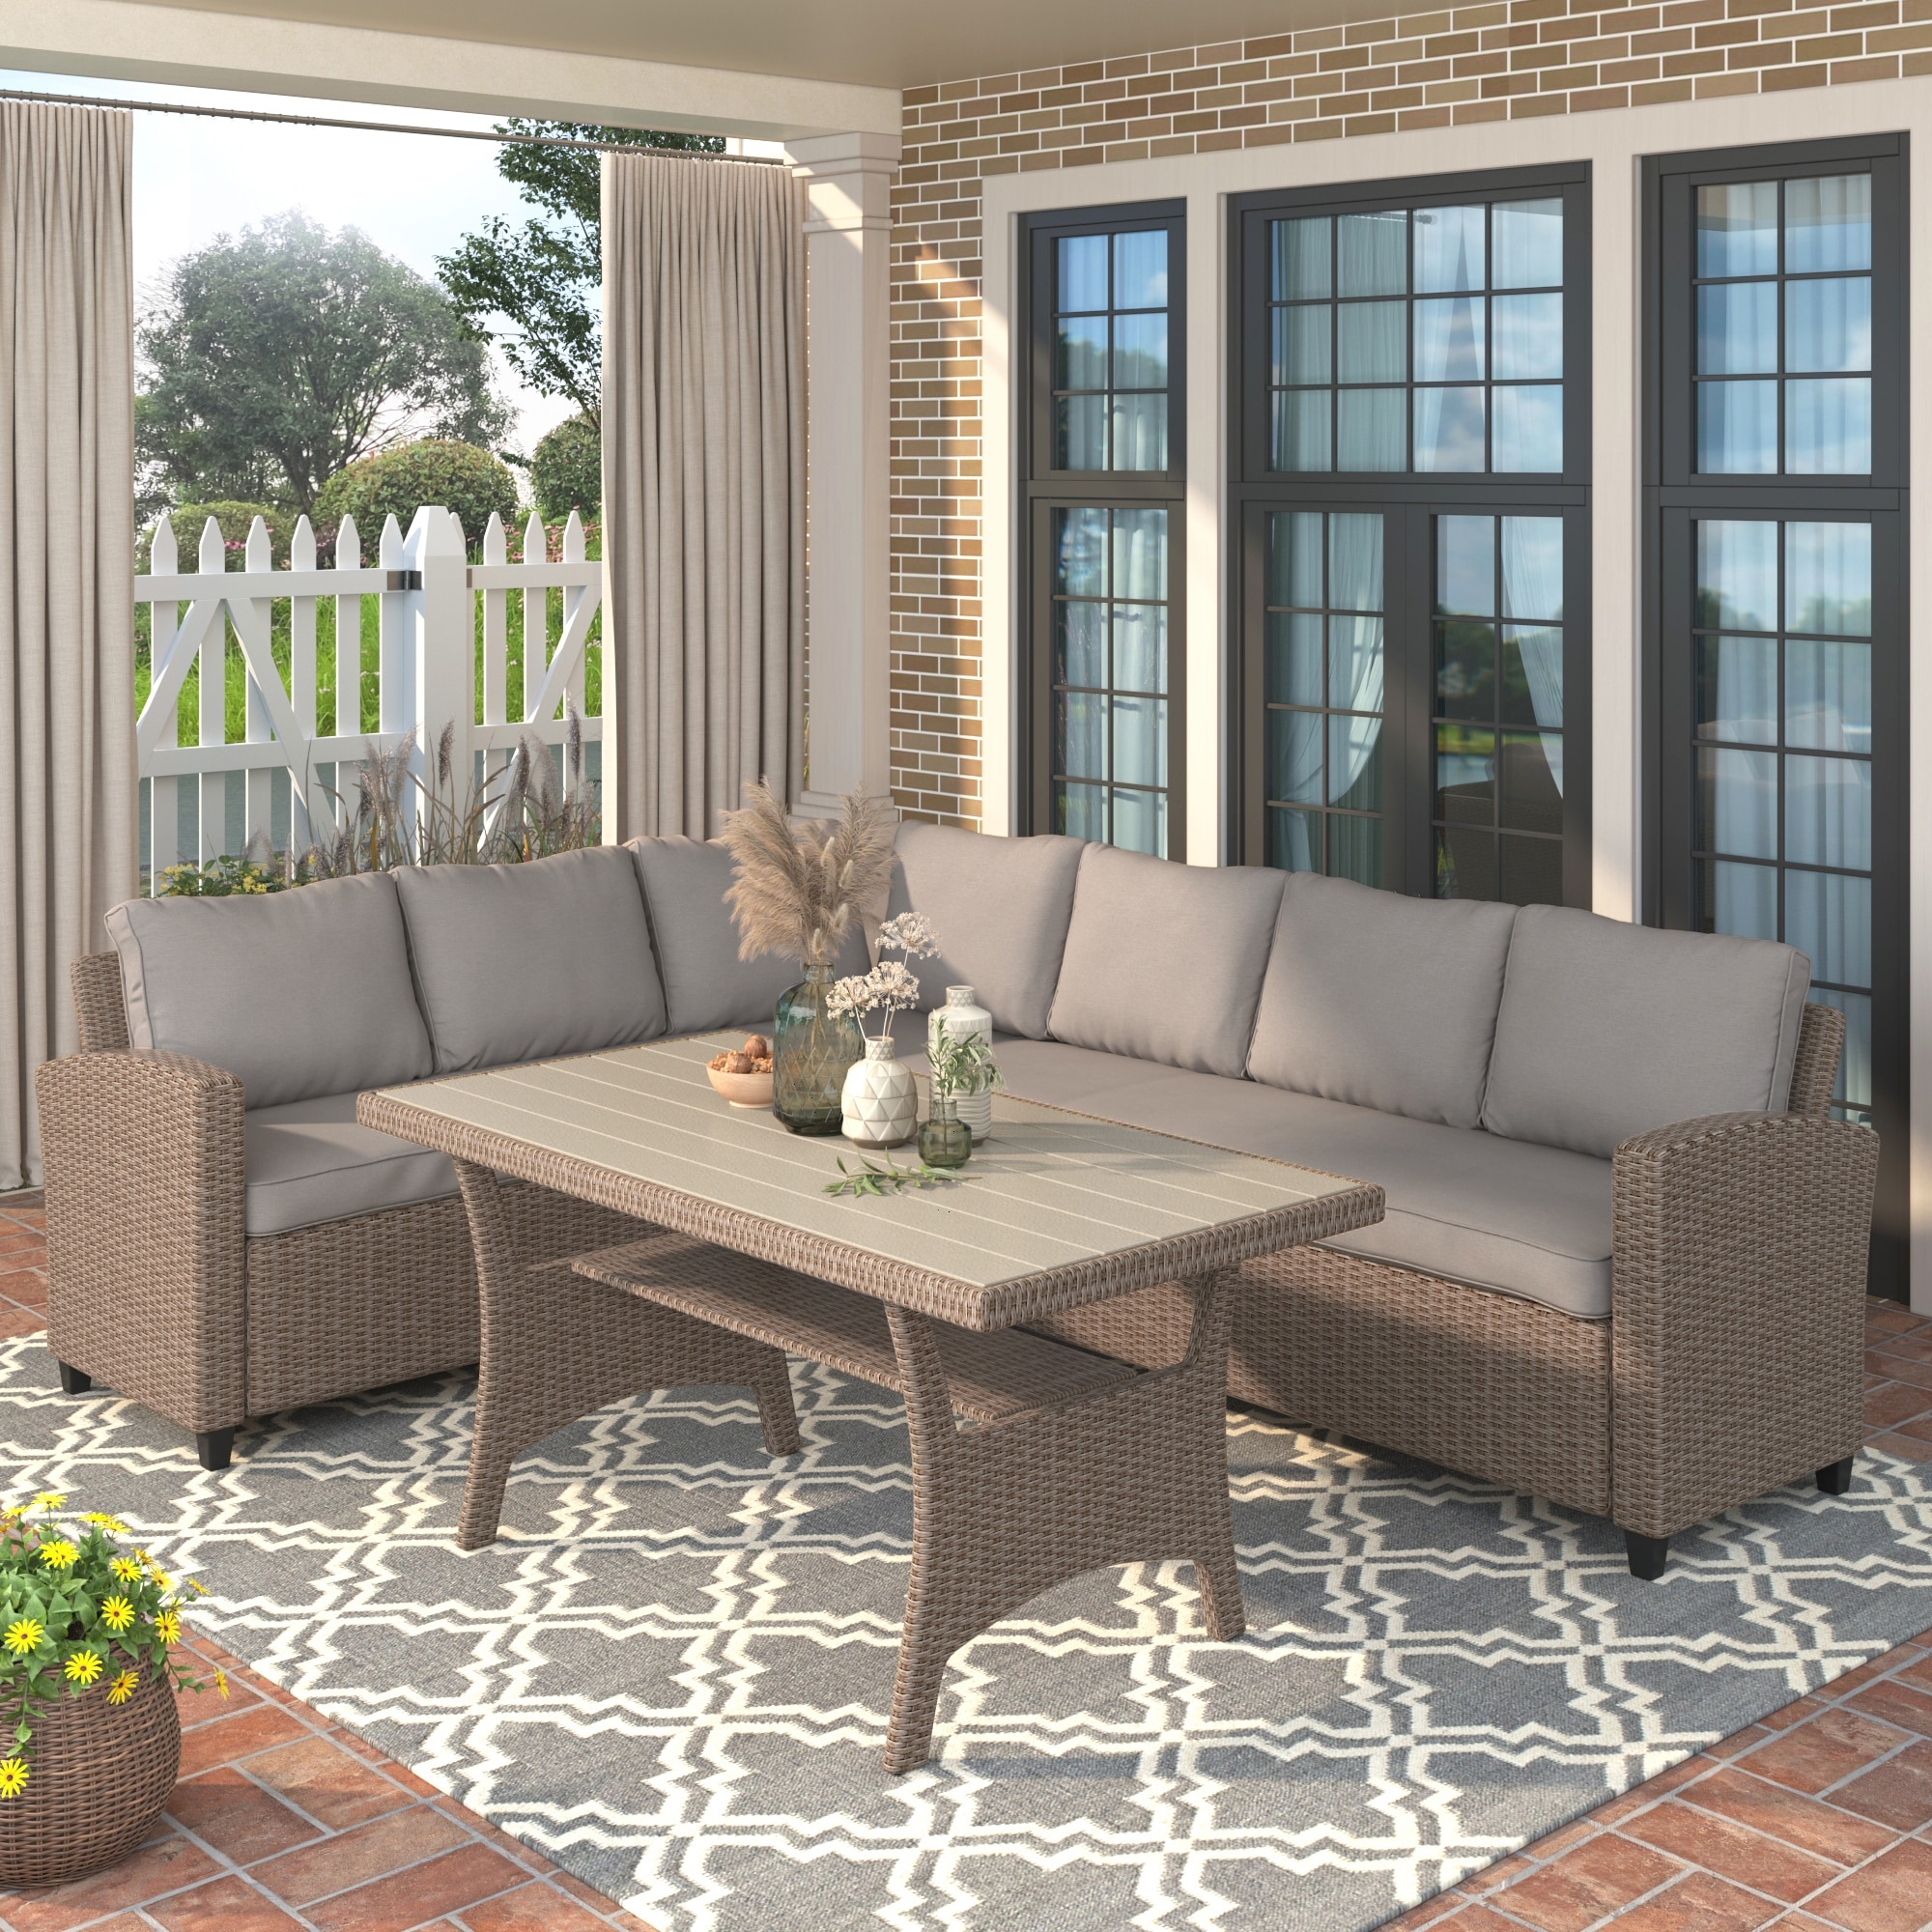 Patio Outdoor Rattan Wicker Conversation Set  Featuring A Table And Sectional Sofa Sets.